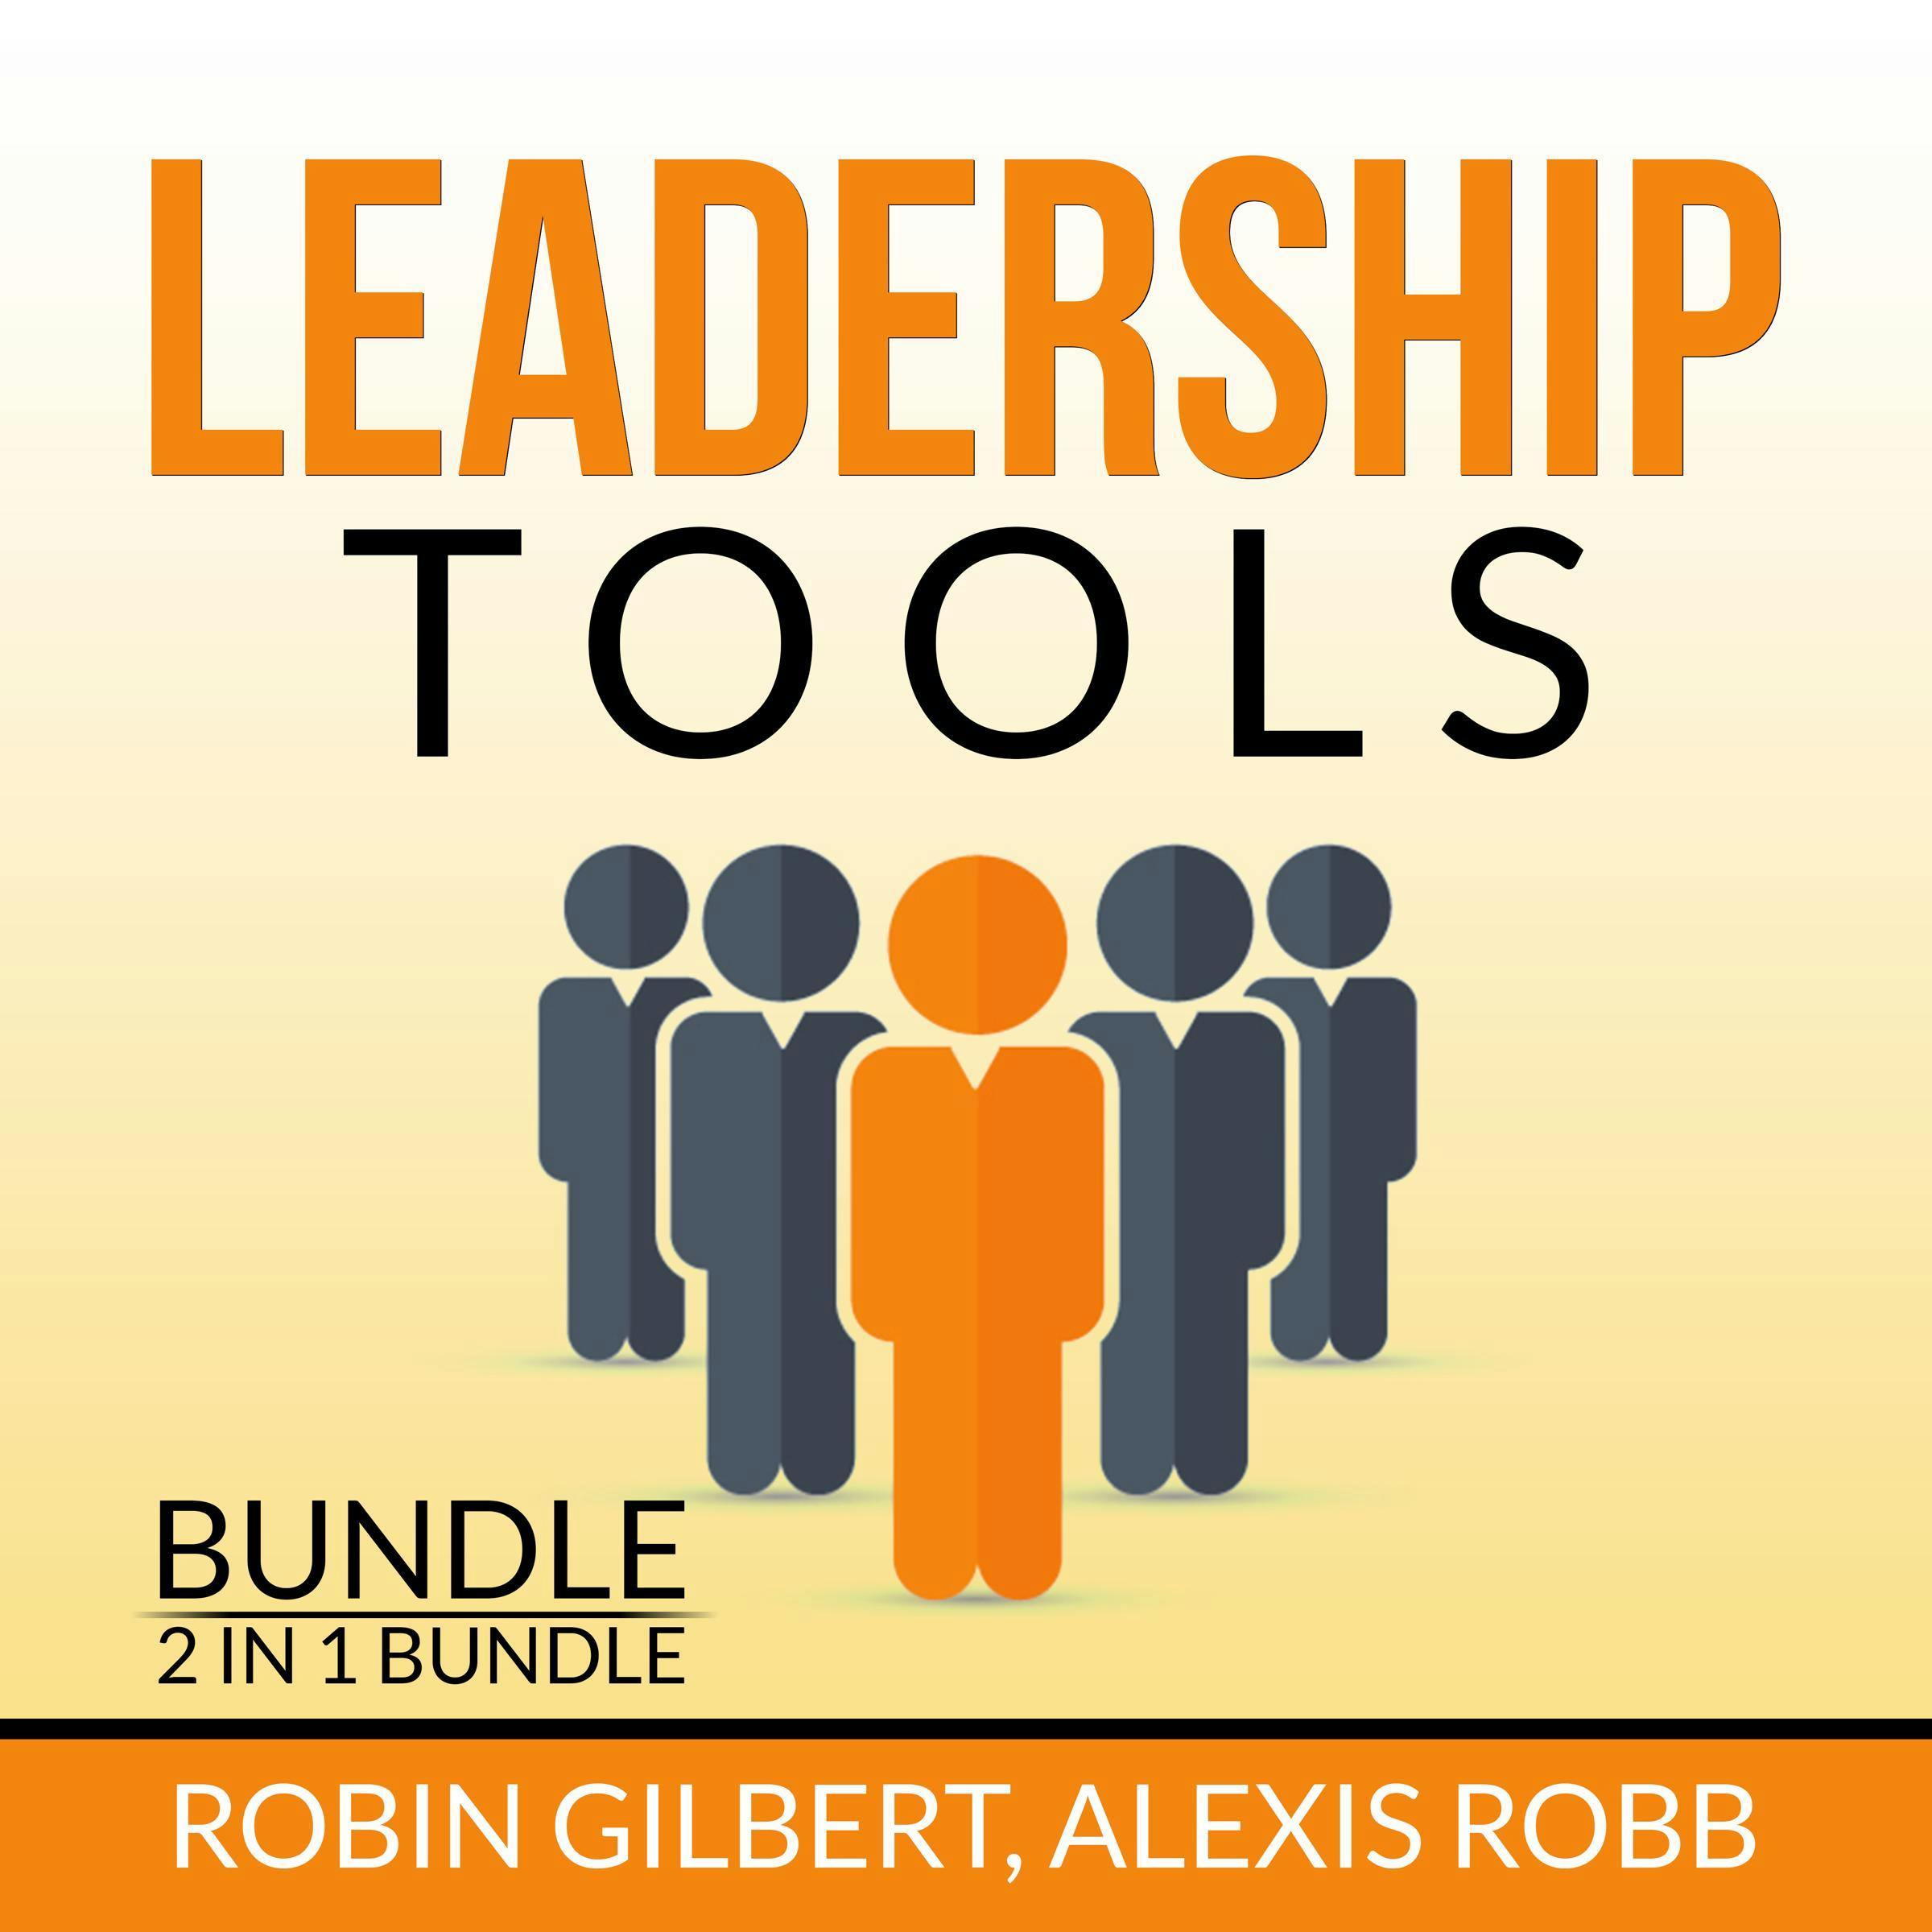 Leadership Tools Bundle, 2 in 1 Bundle: Leadership Concepts, Dealing with Conflict - Robin Gilbert, Alexis Robb